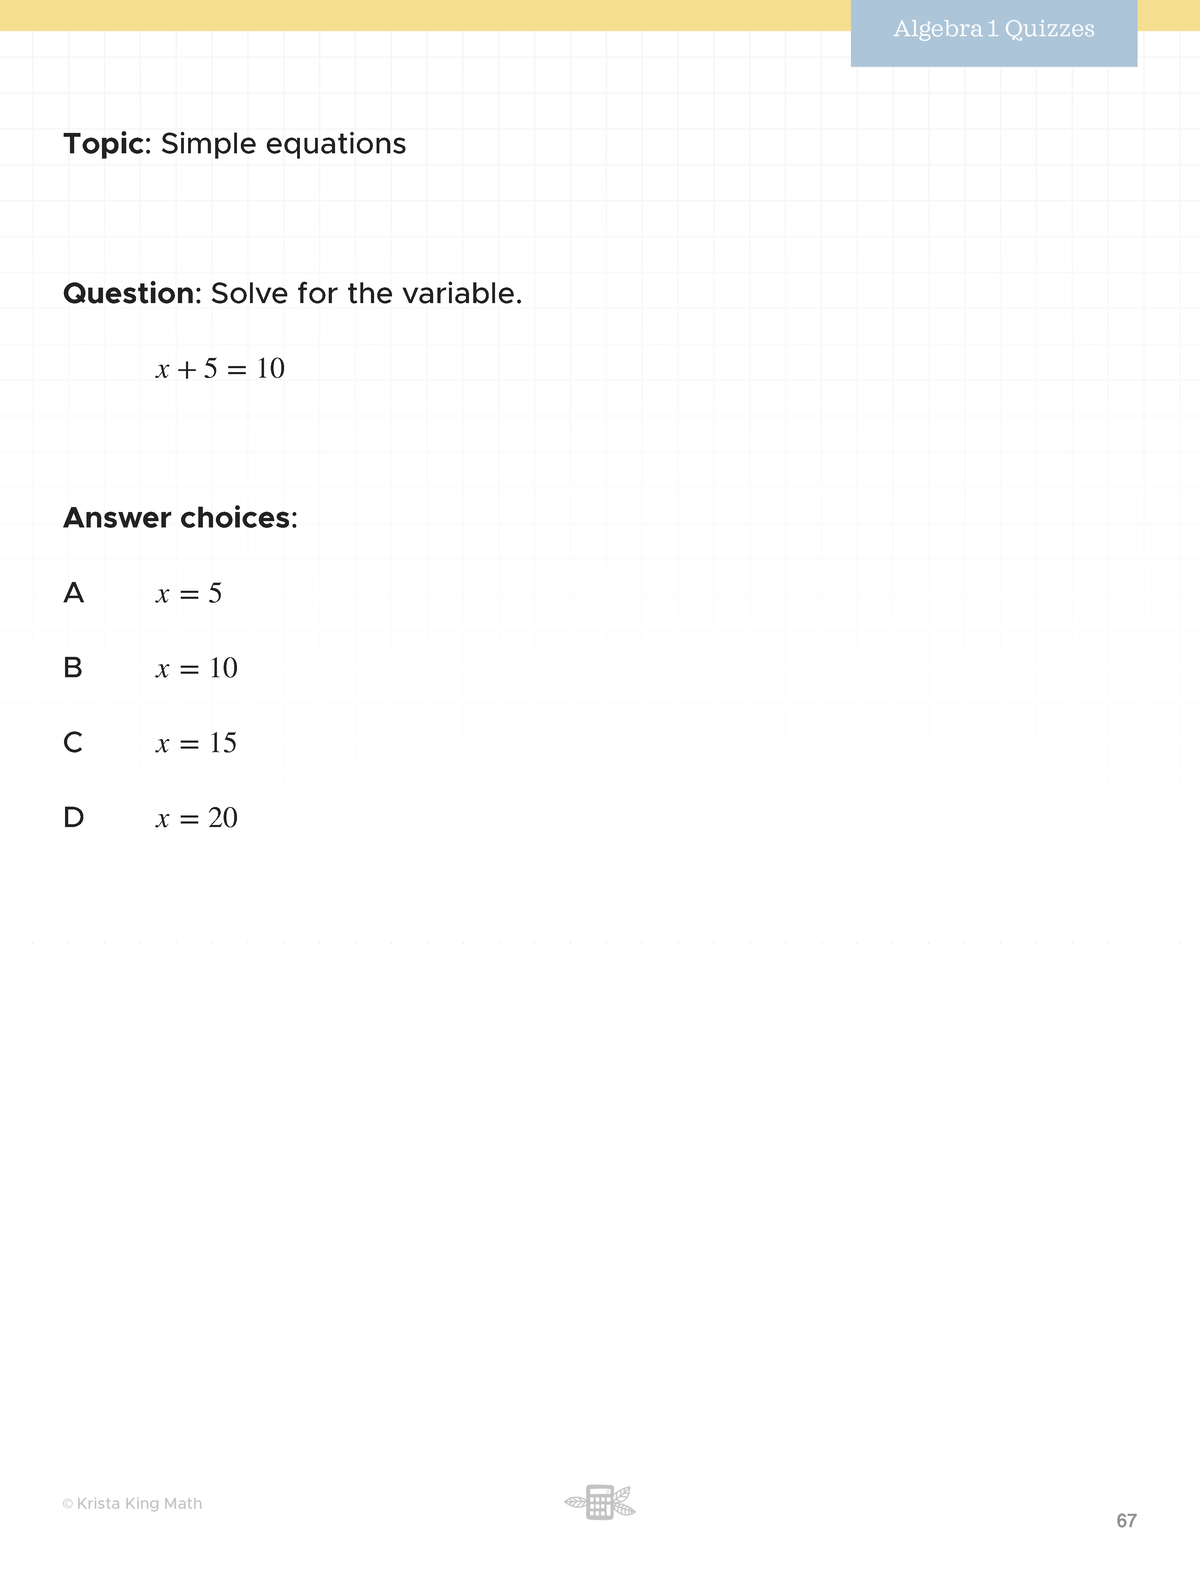 03 Simple equations - asdas - Topic: Simple equations Question: Solve for  the variable. x + 5 = 10 - Studocu